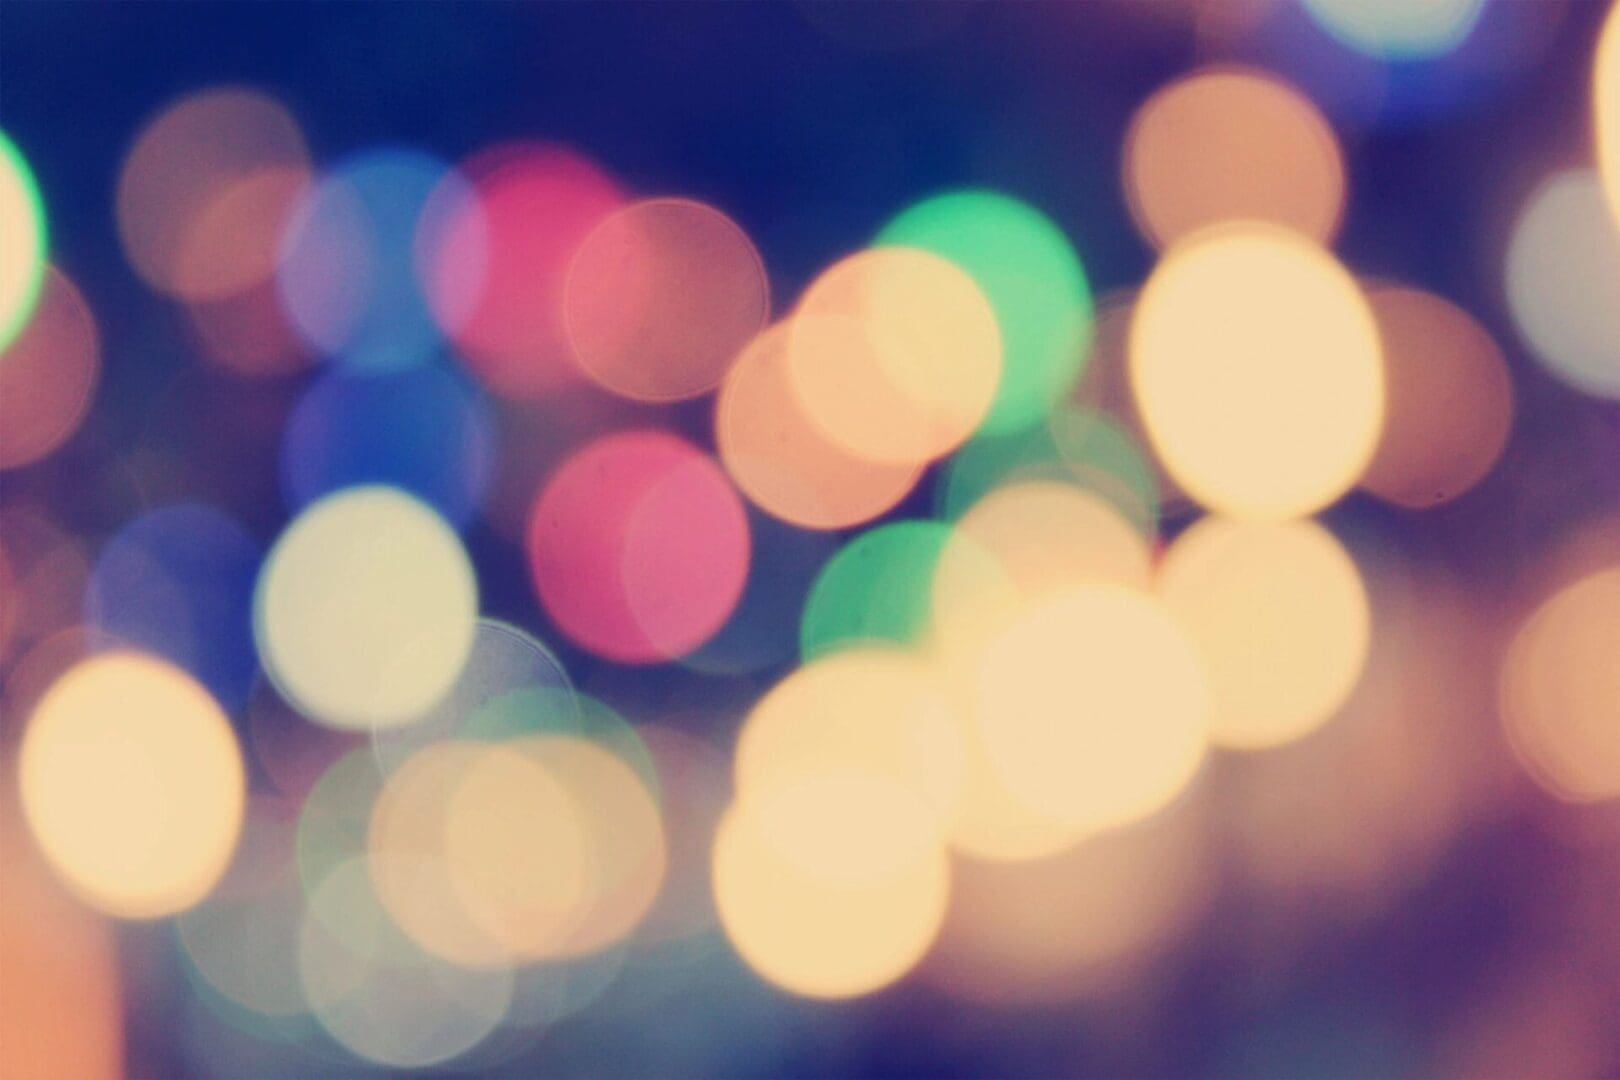 A soft-focused image featuring colorful bokeh lights.